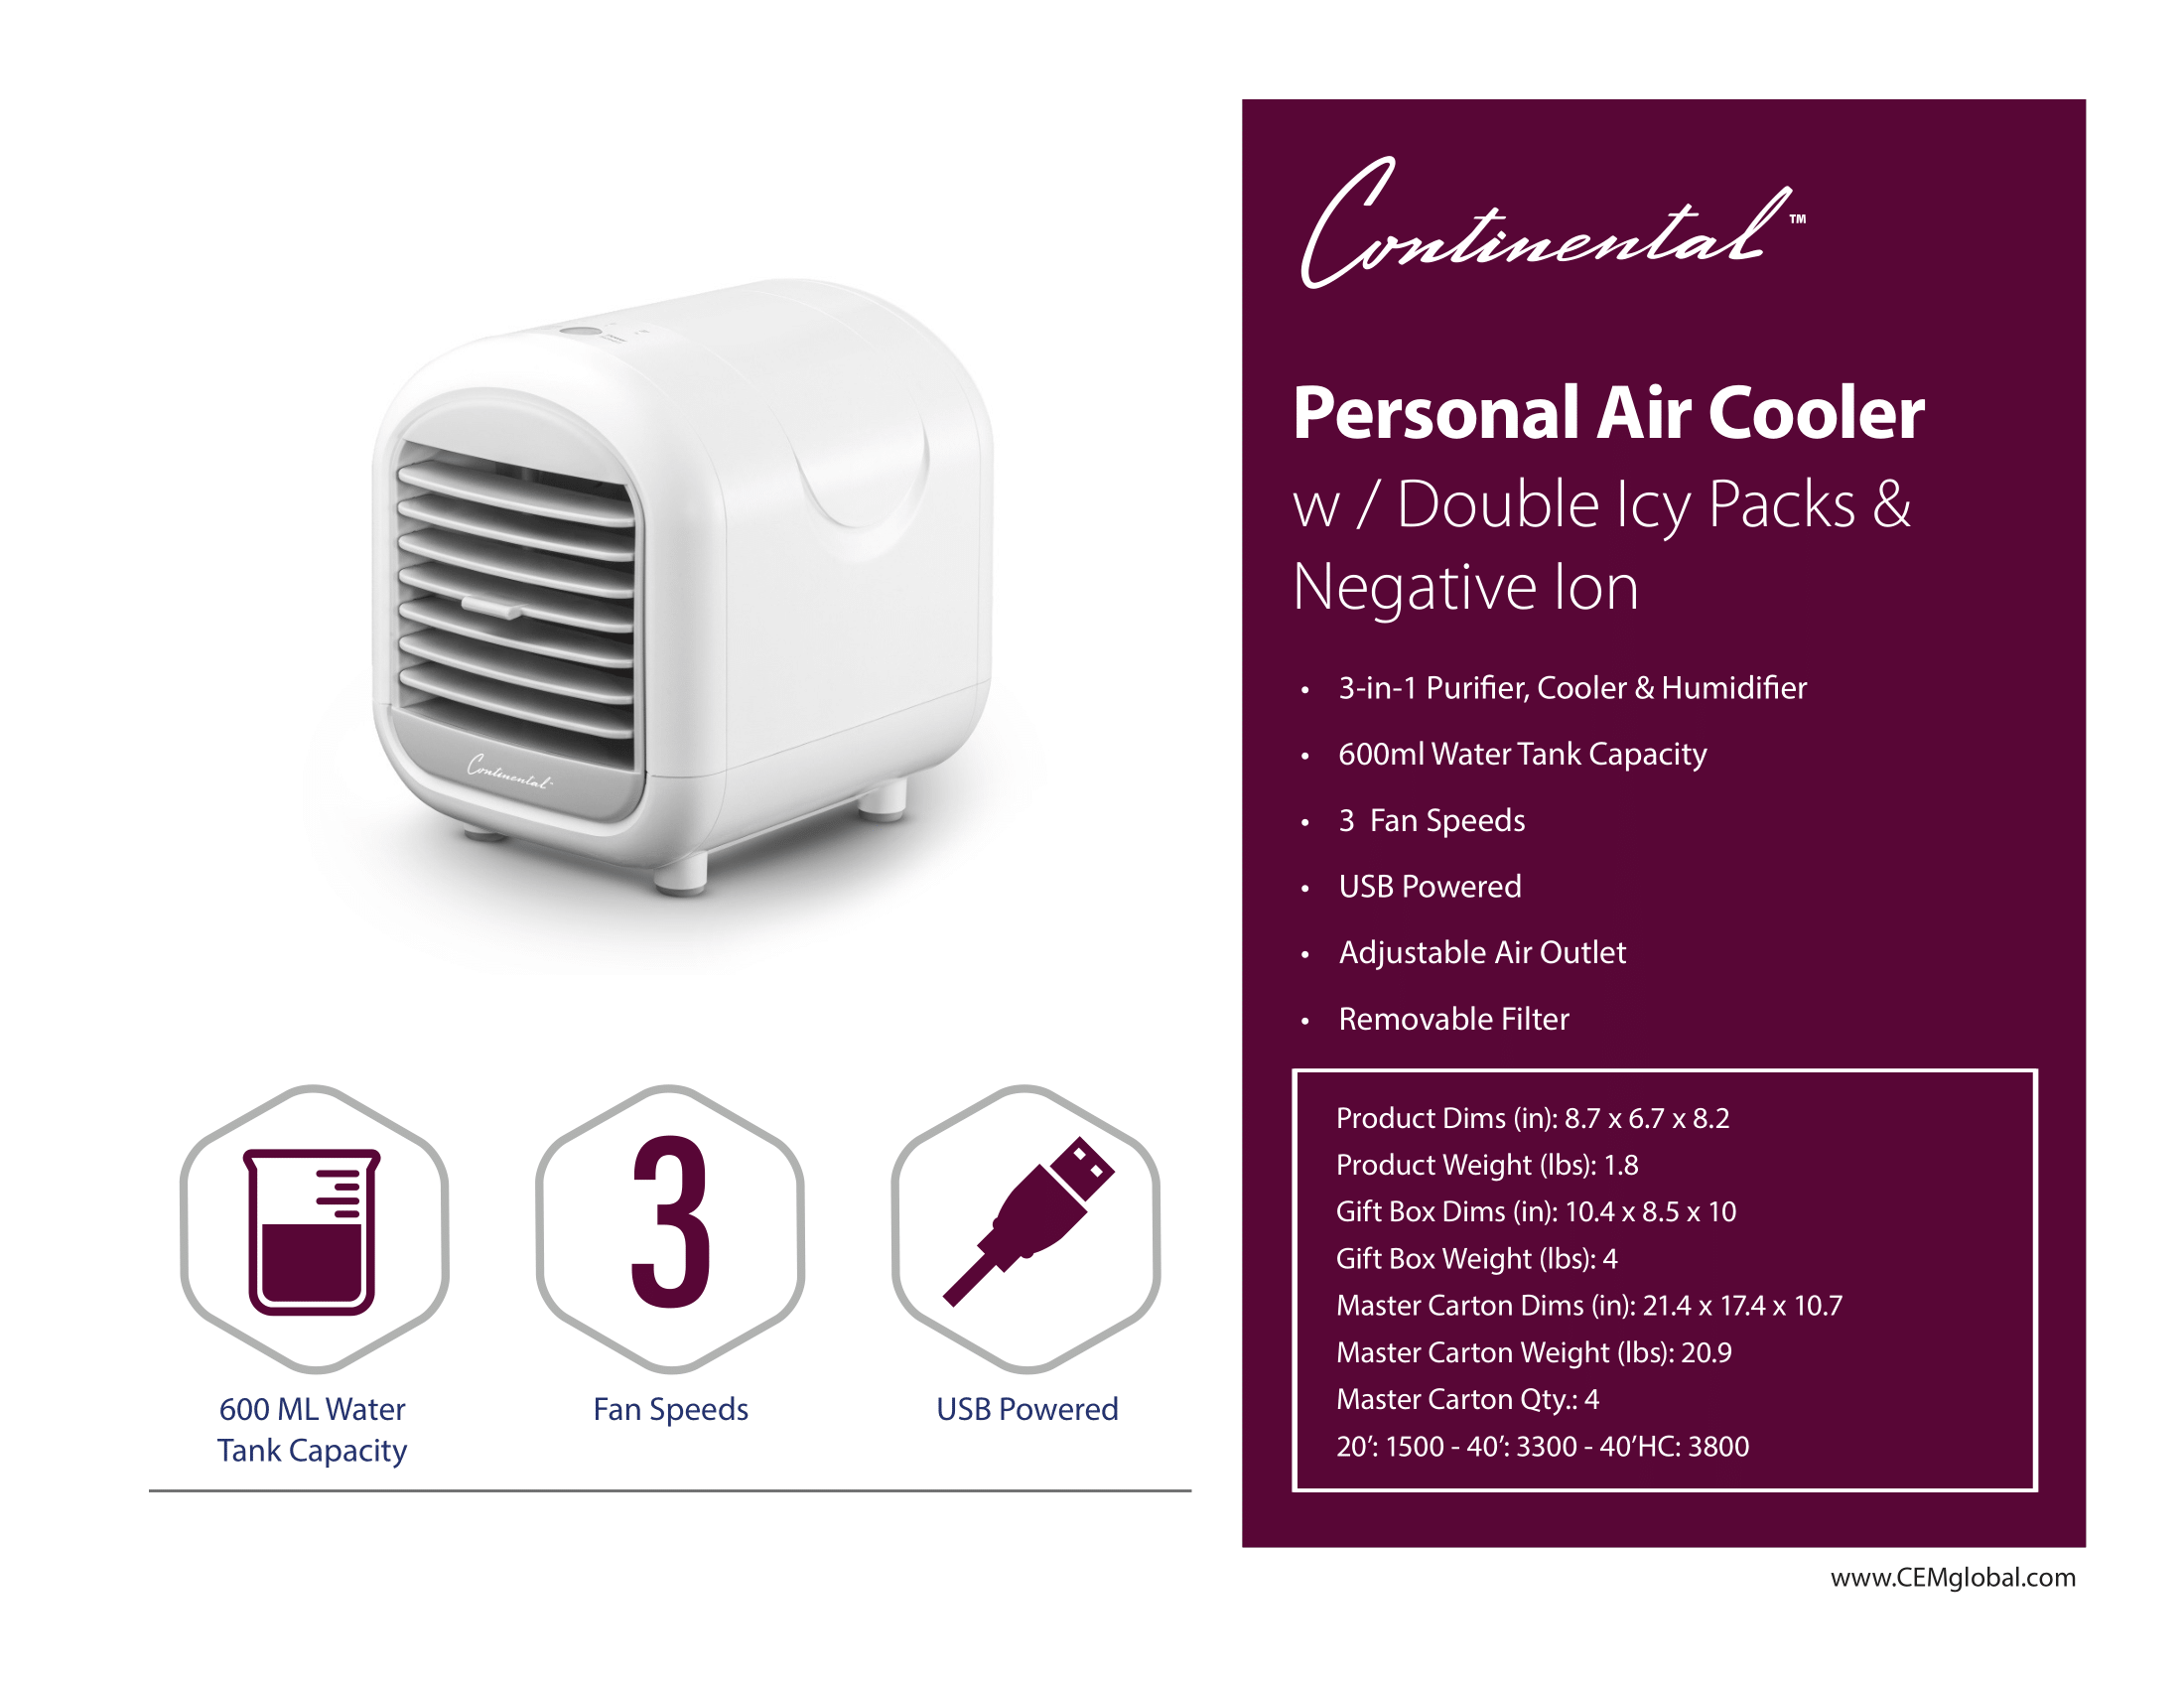 Personal Air Cooler w / Double Icy Packs & Negative Ion